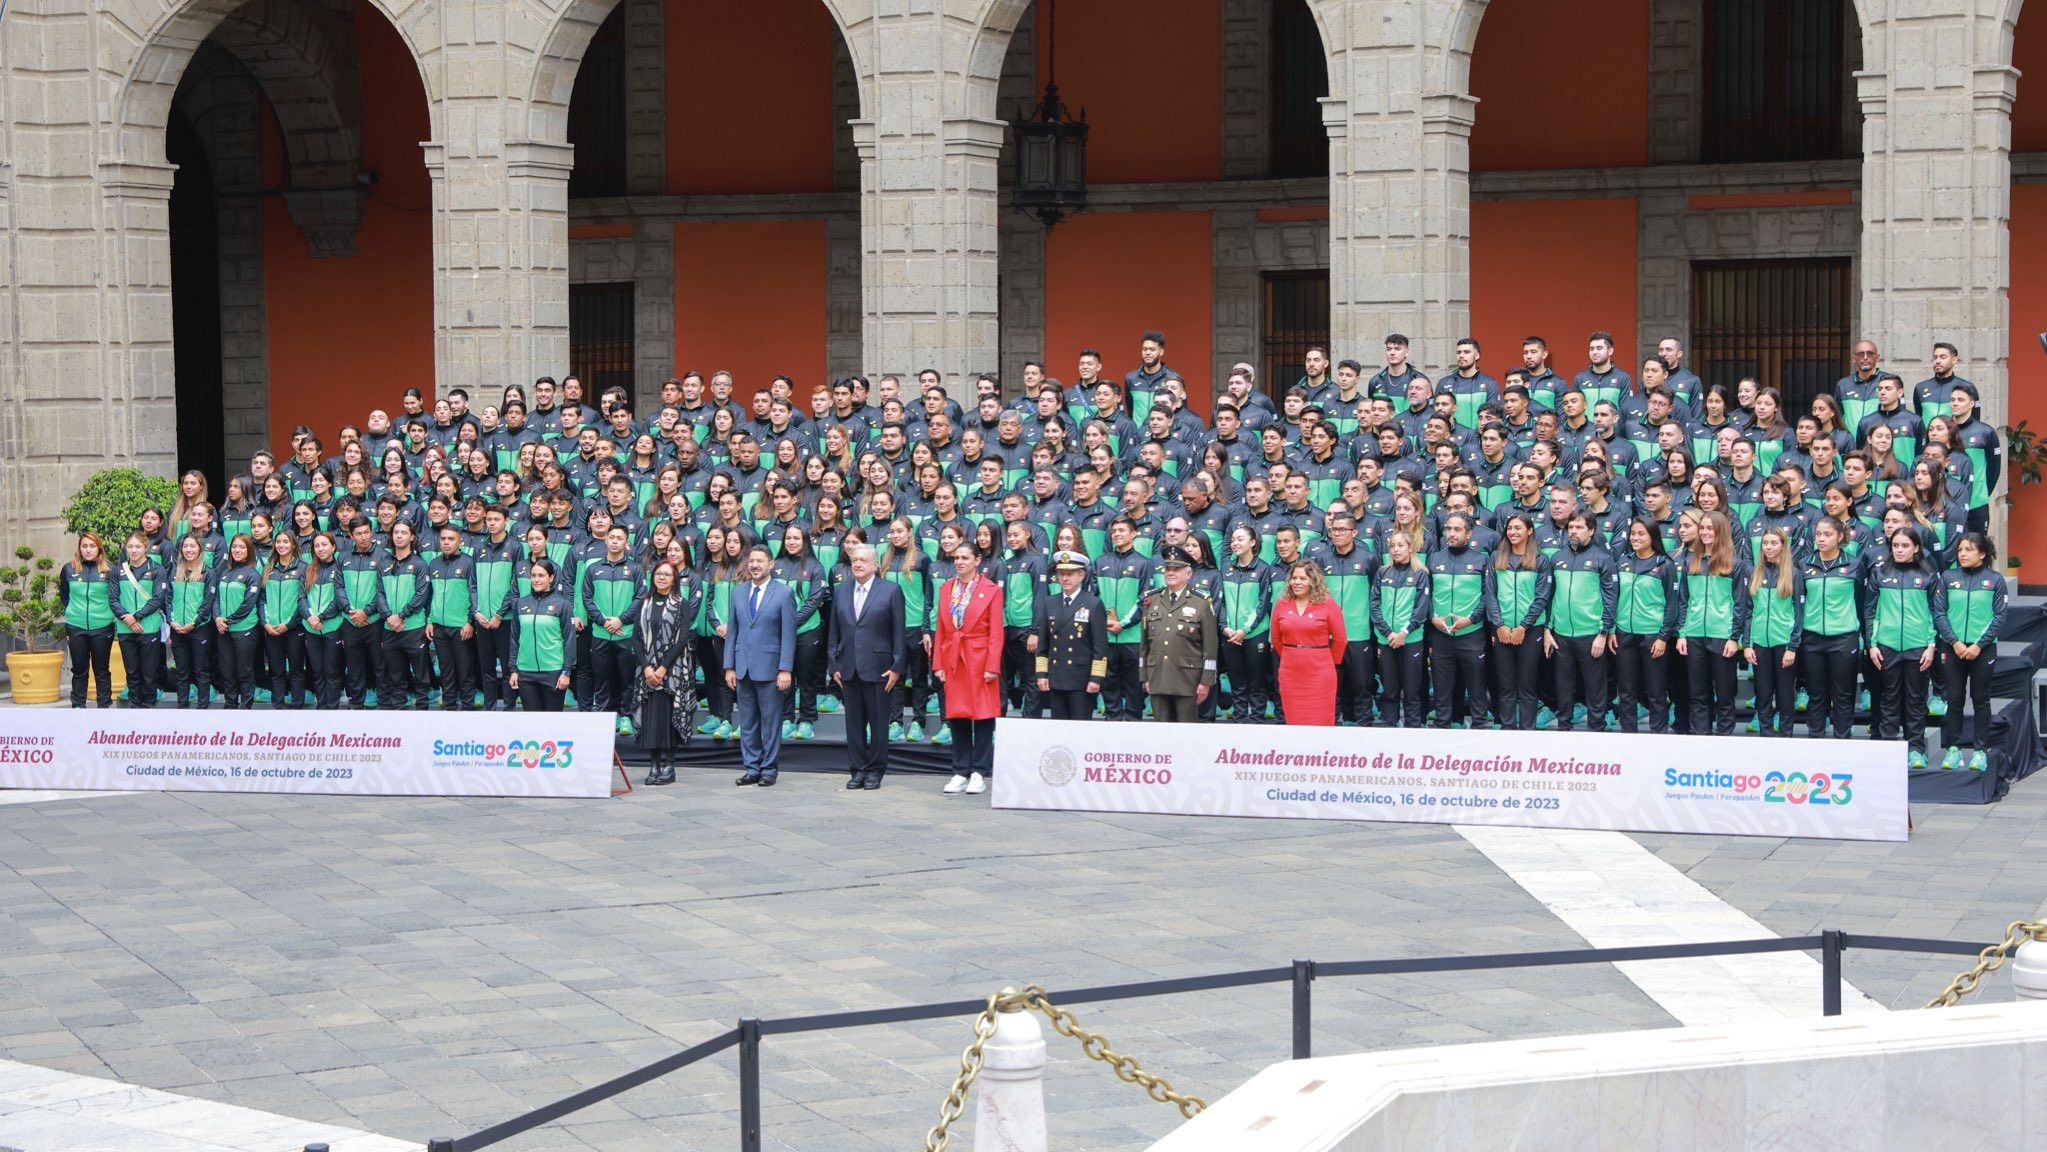 Mexico's delegation for Santiago 2023 is without doctors for the early stages of the Games ©COM/X